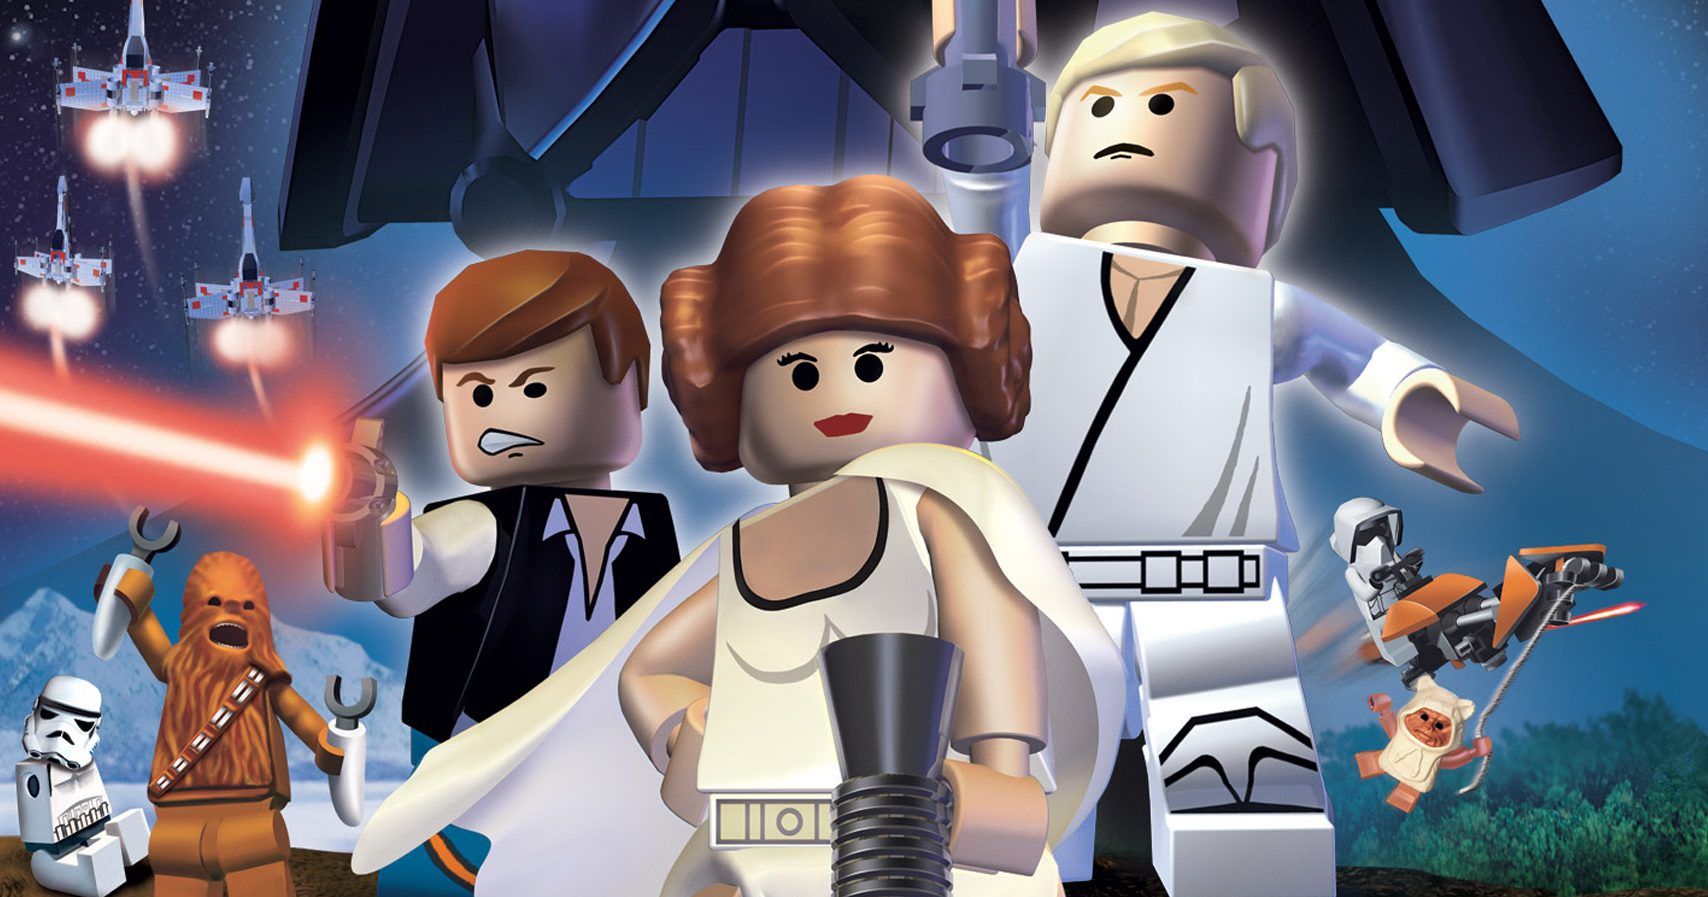 Jedi Fallen Order Isn’t The Only Upcoming Star Wars Game  Another Lego Game Is In The Works